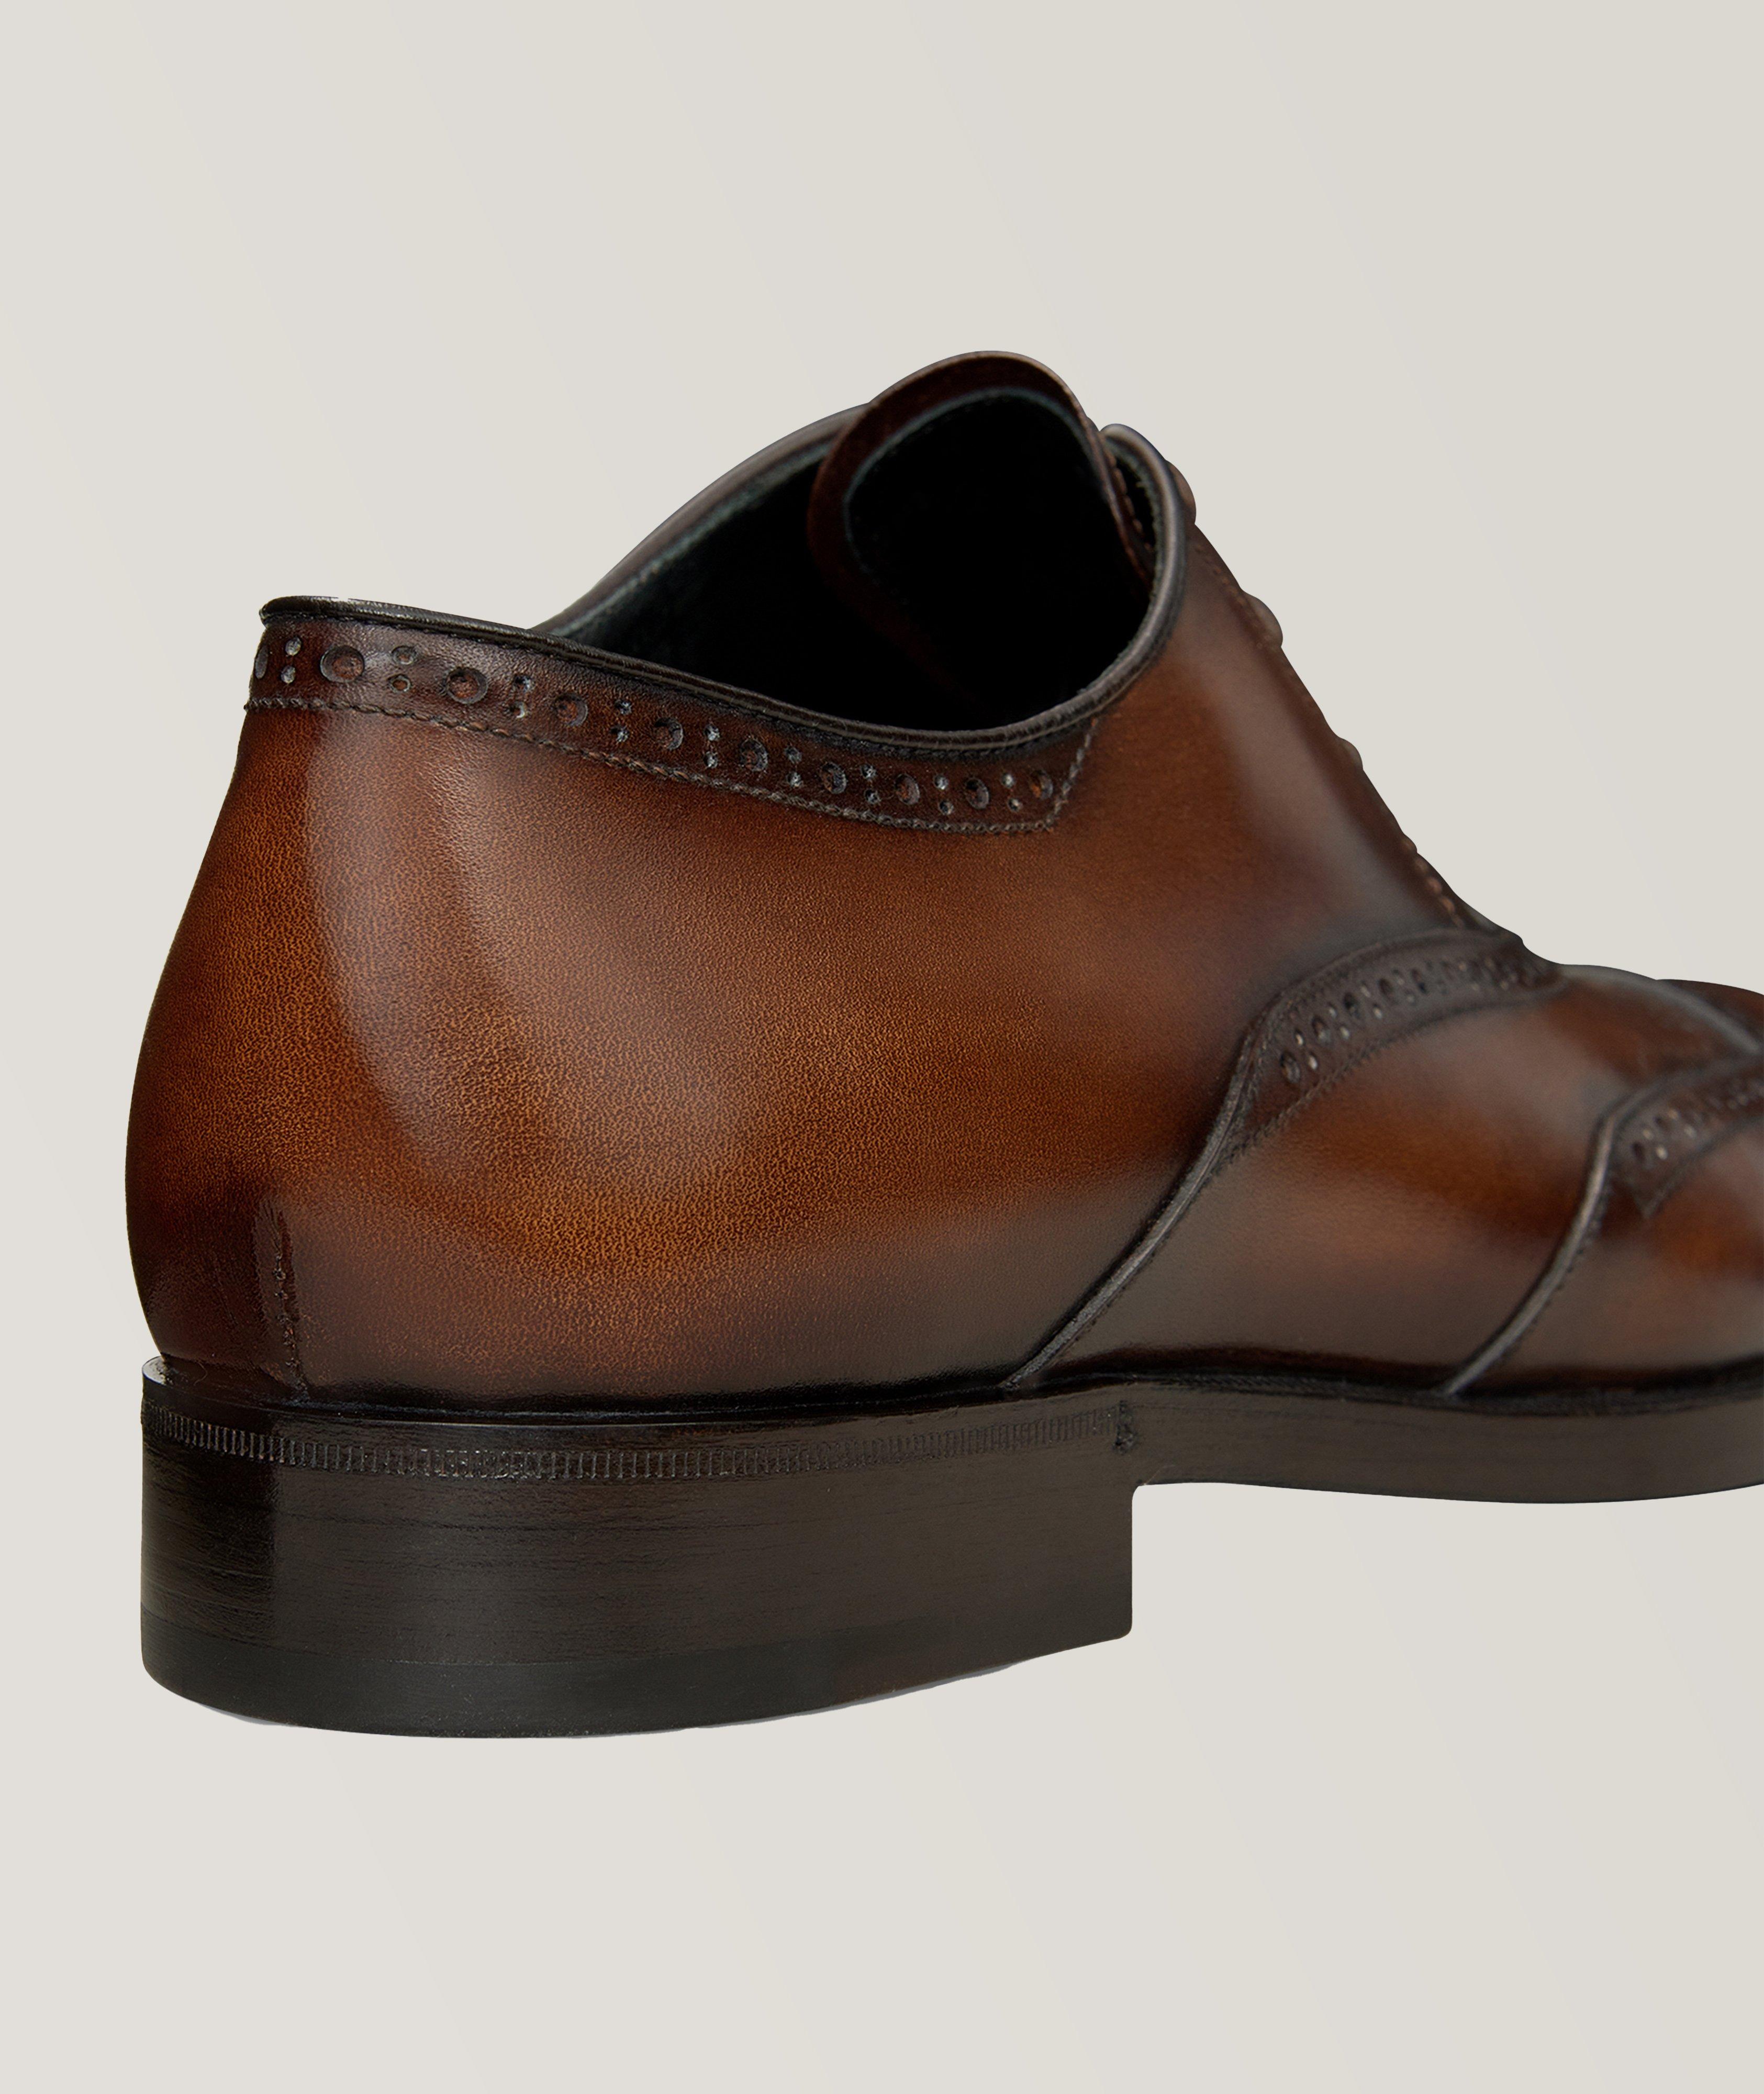 Asymmetric Broque Leather Oxford  image 4